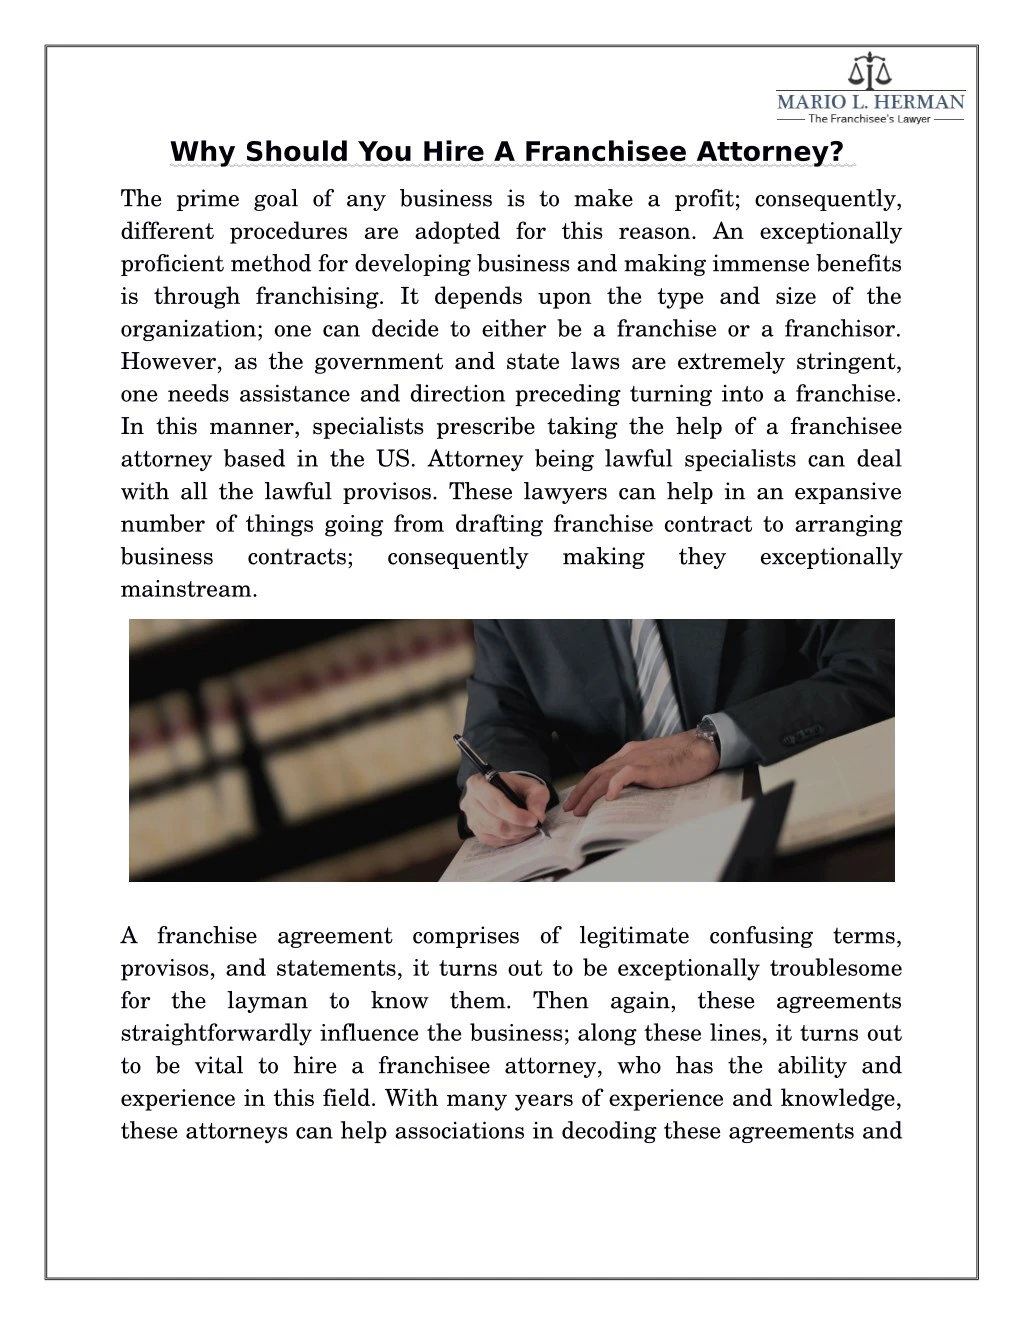 why should you hire a franchisee attorney